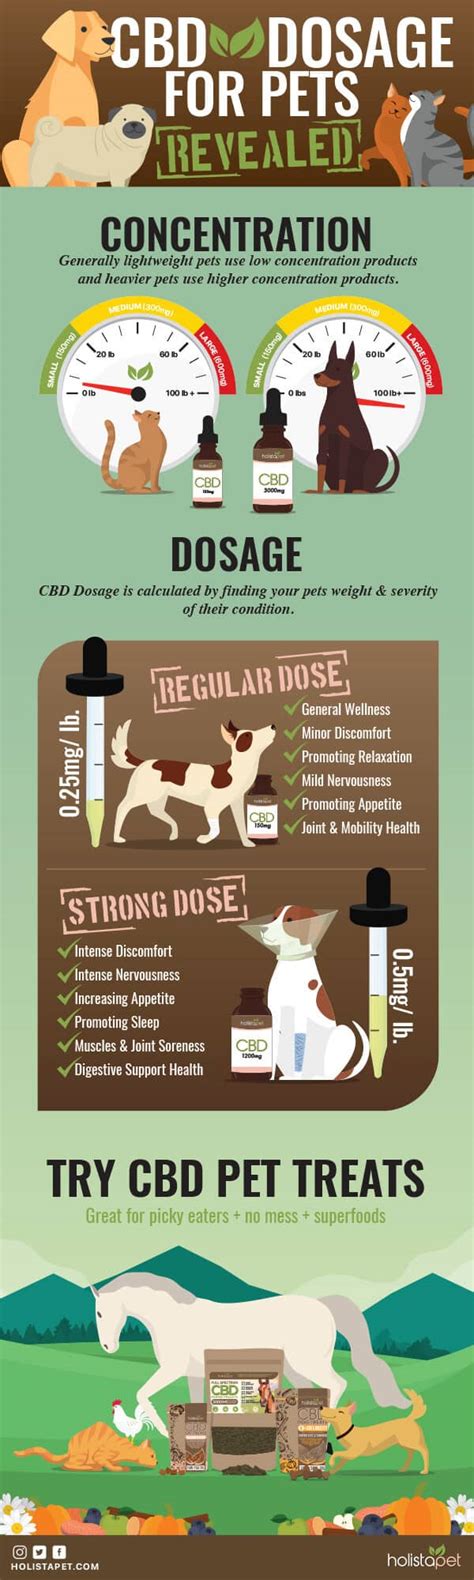  Here are some of the main reasons people administer CBD to their pets